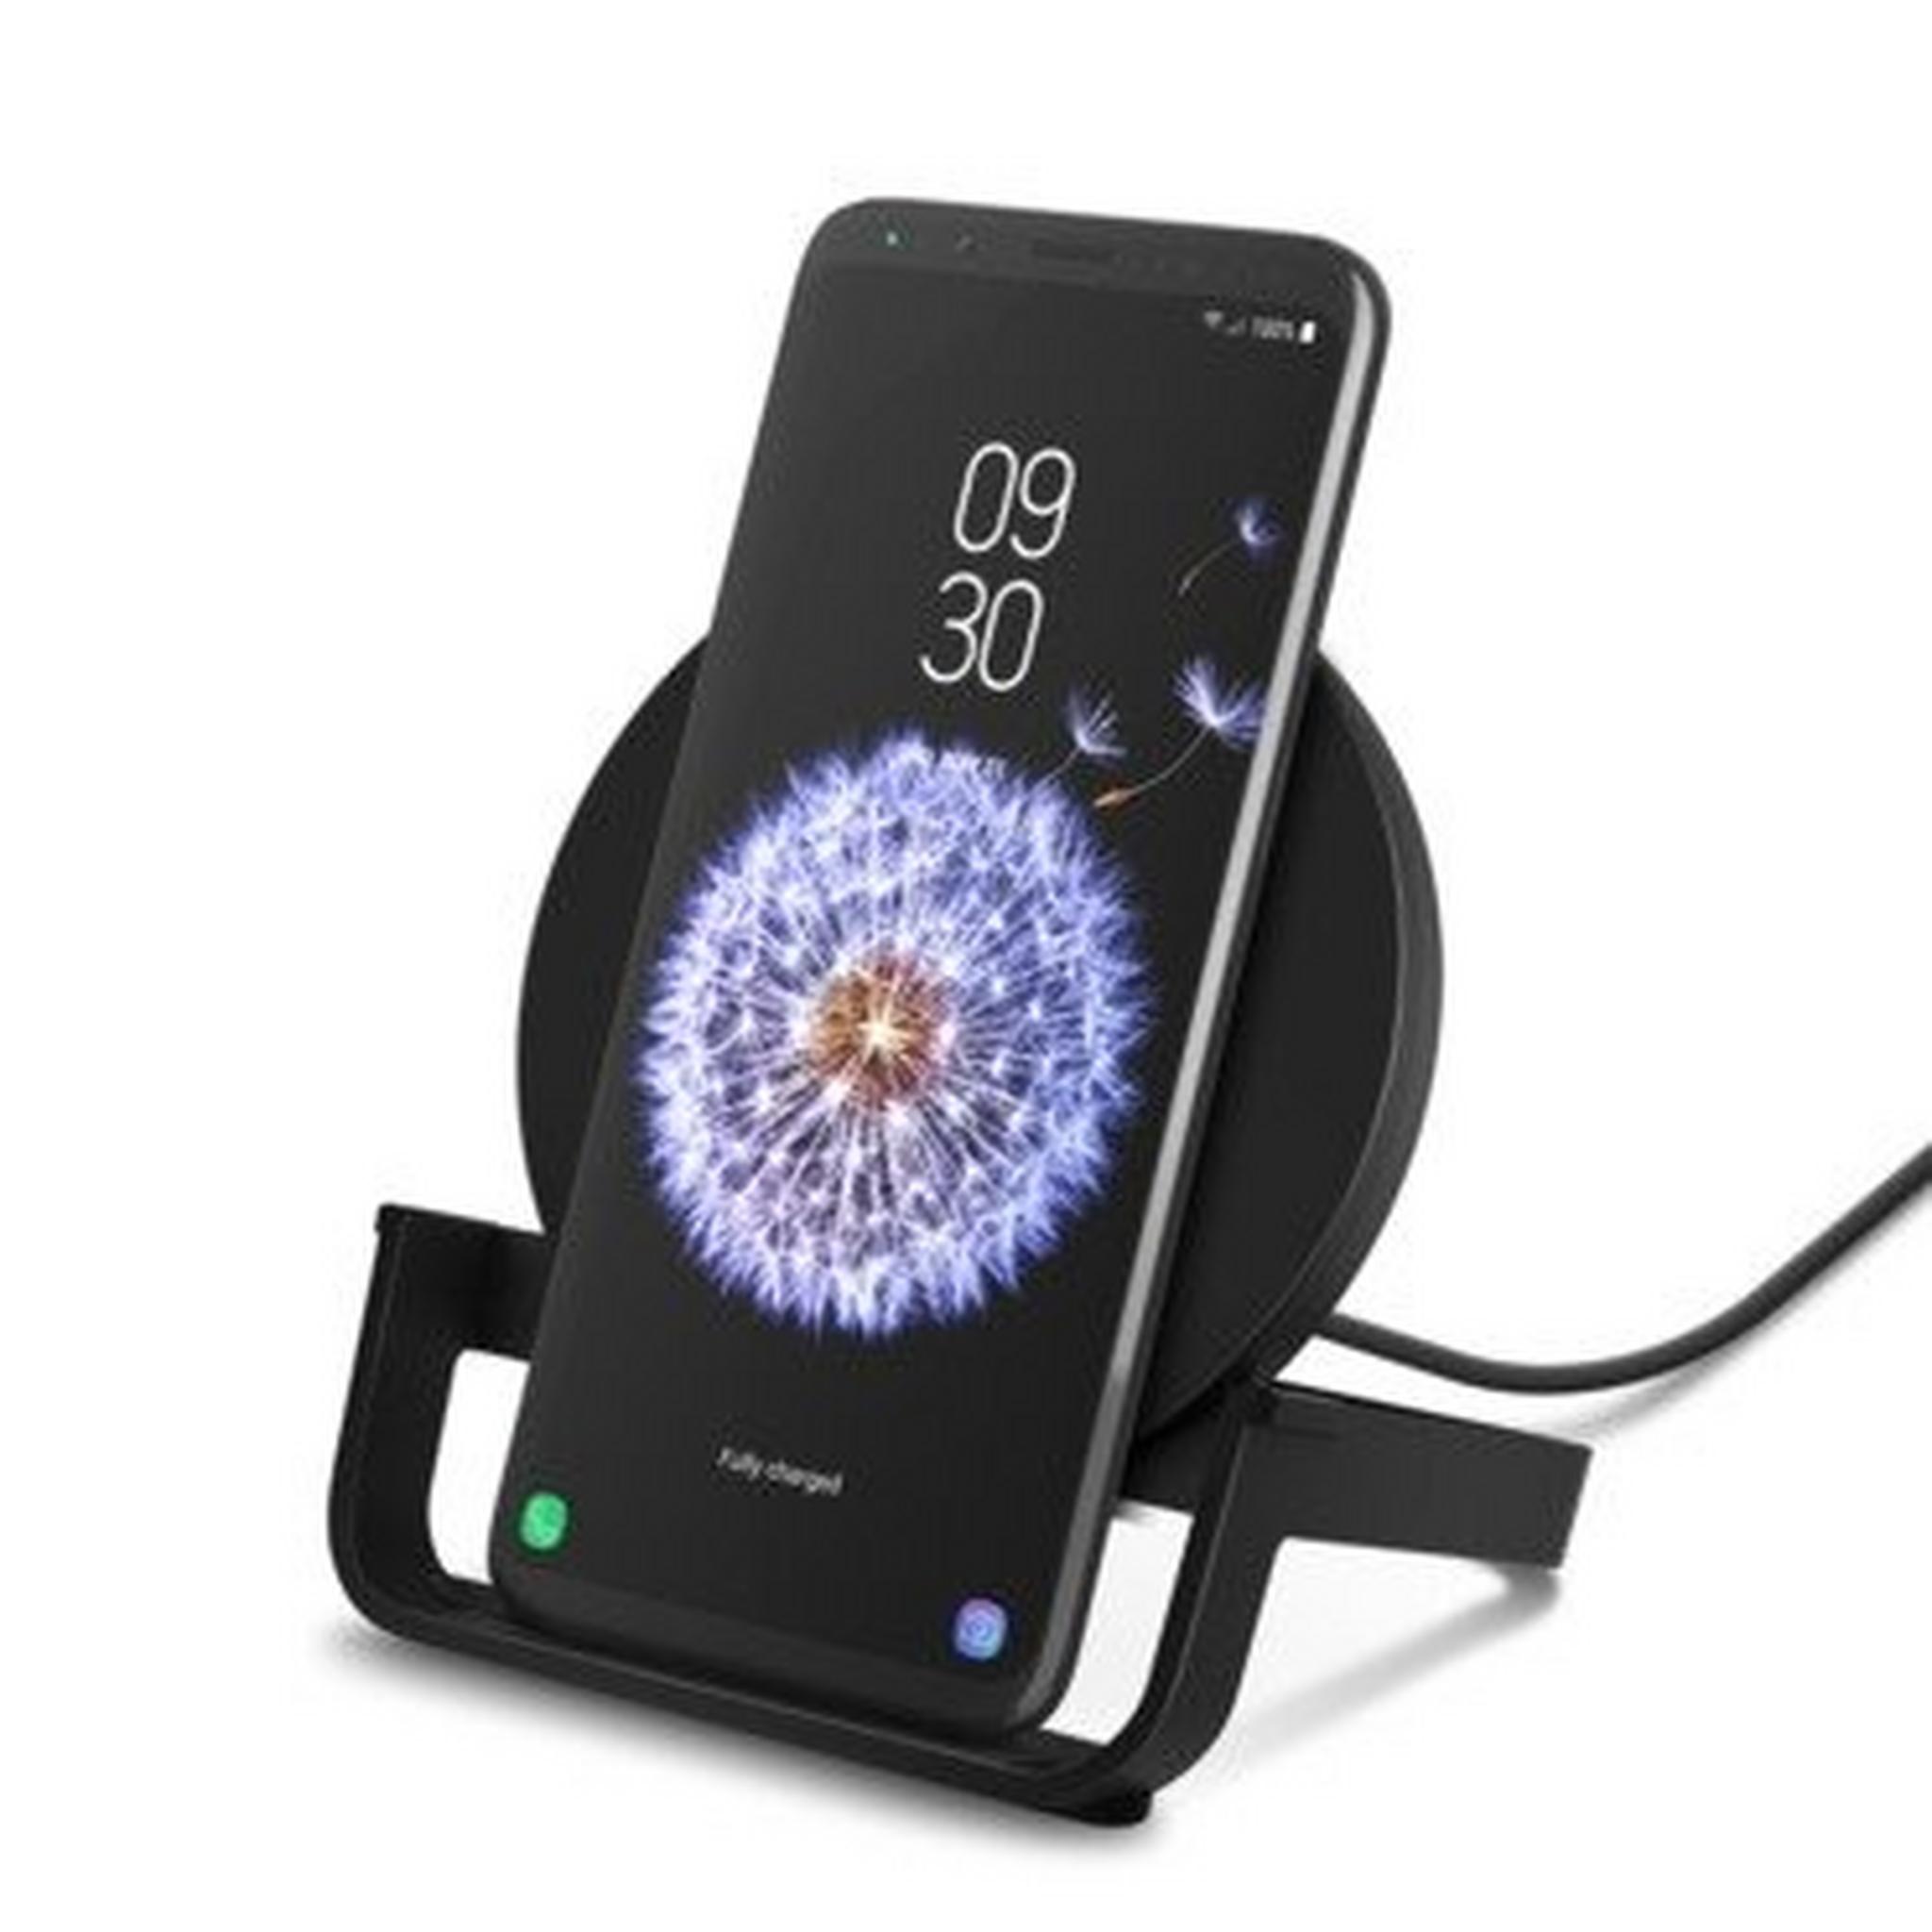 Belkin Boost Charge 10W Fast Wireless Charging Stand + Quick Charge 3.0 wall Charger - Black